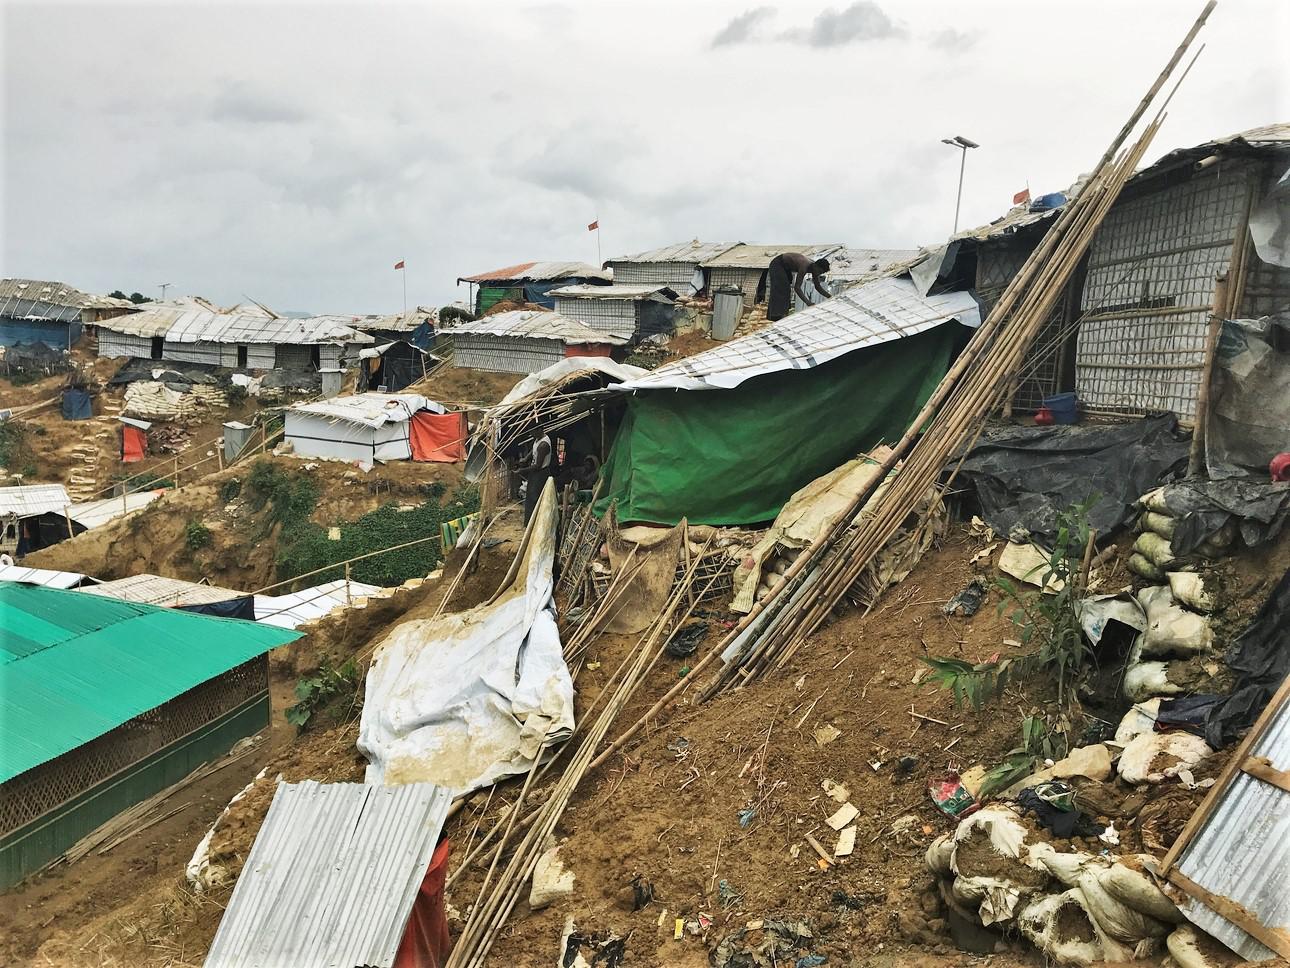 A landslide in the Kutupalong-Balukhali refugee camp in Bangladesh on May 18, 2018 washed away a shelter housing 17 Rohingya refugees, all of whom were unharmed. 